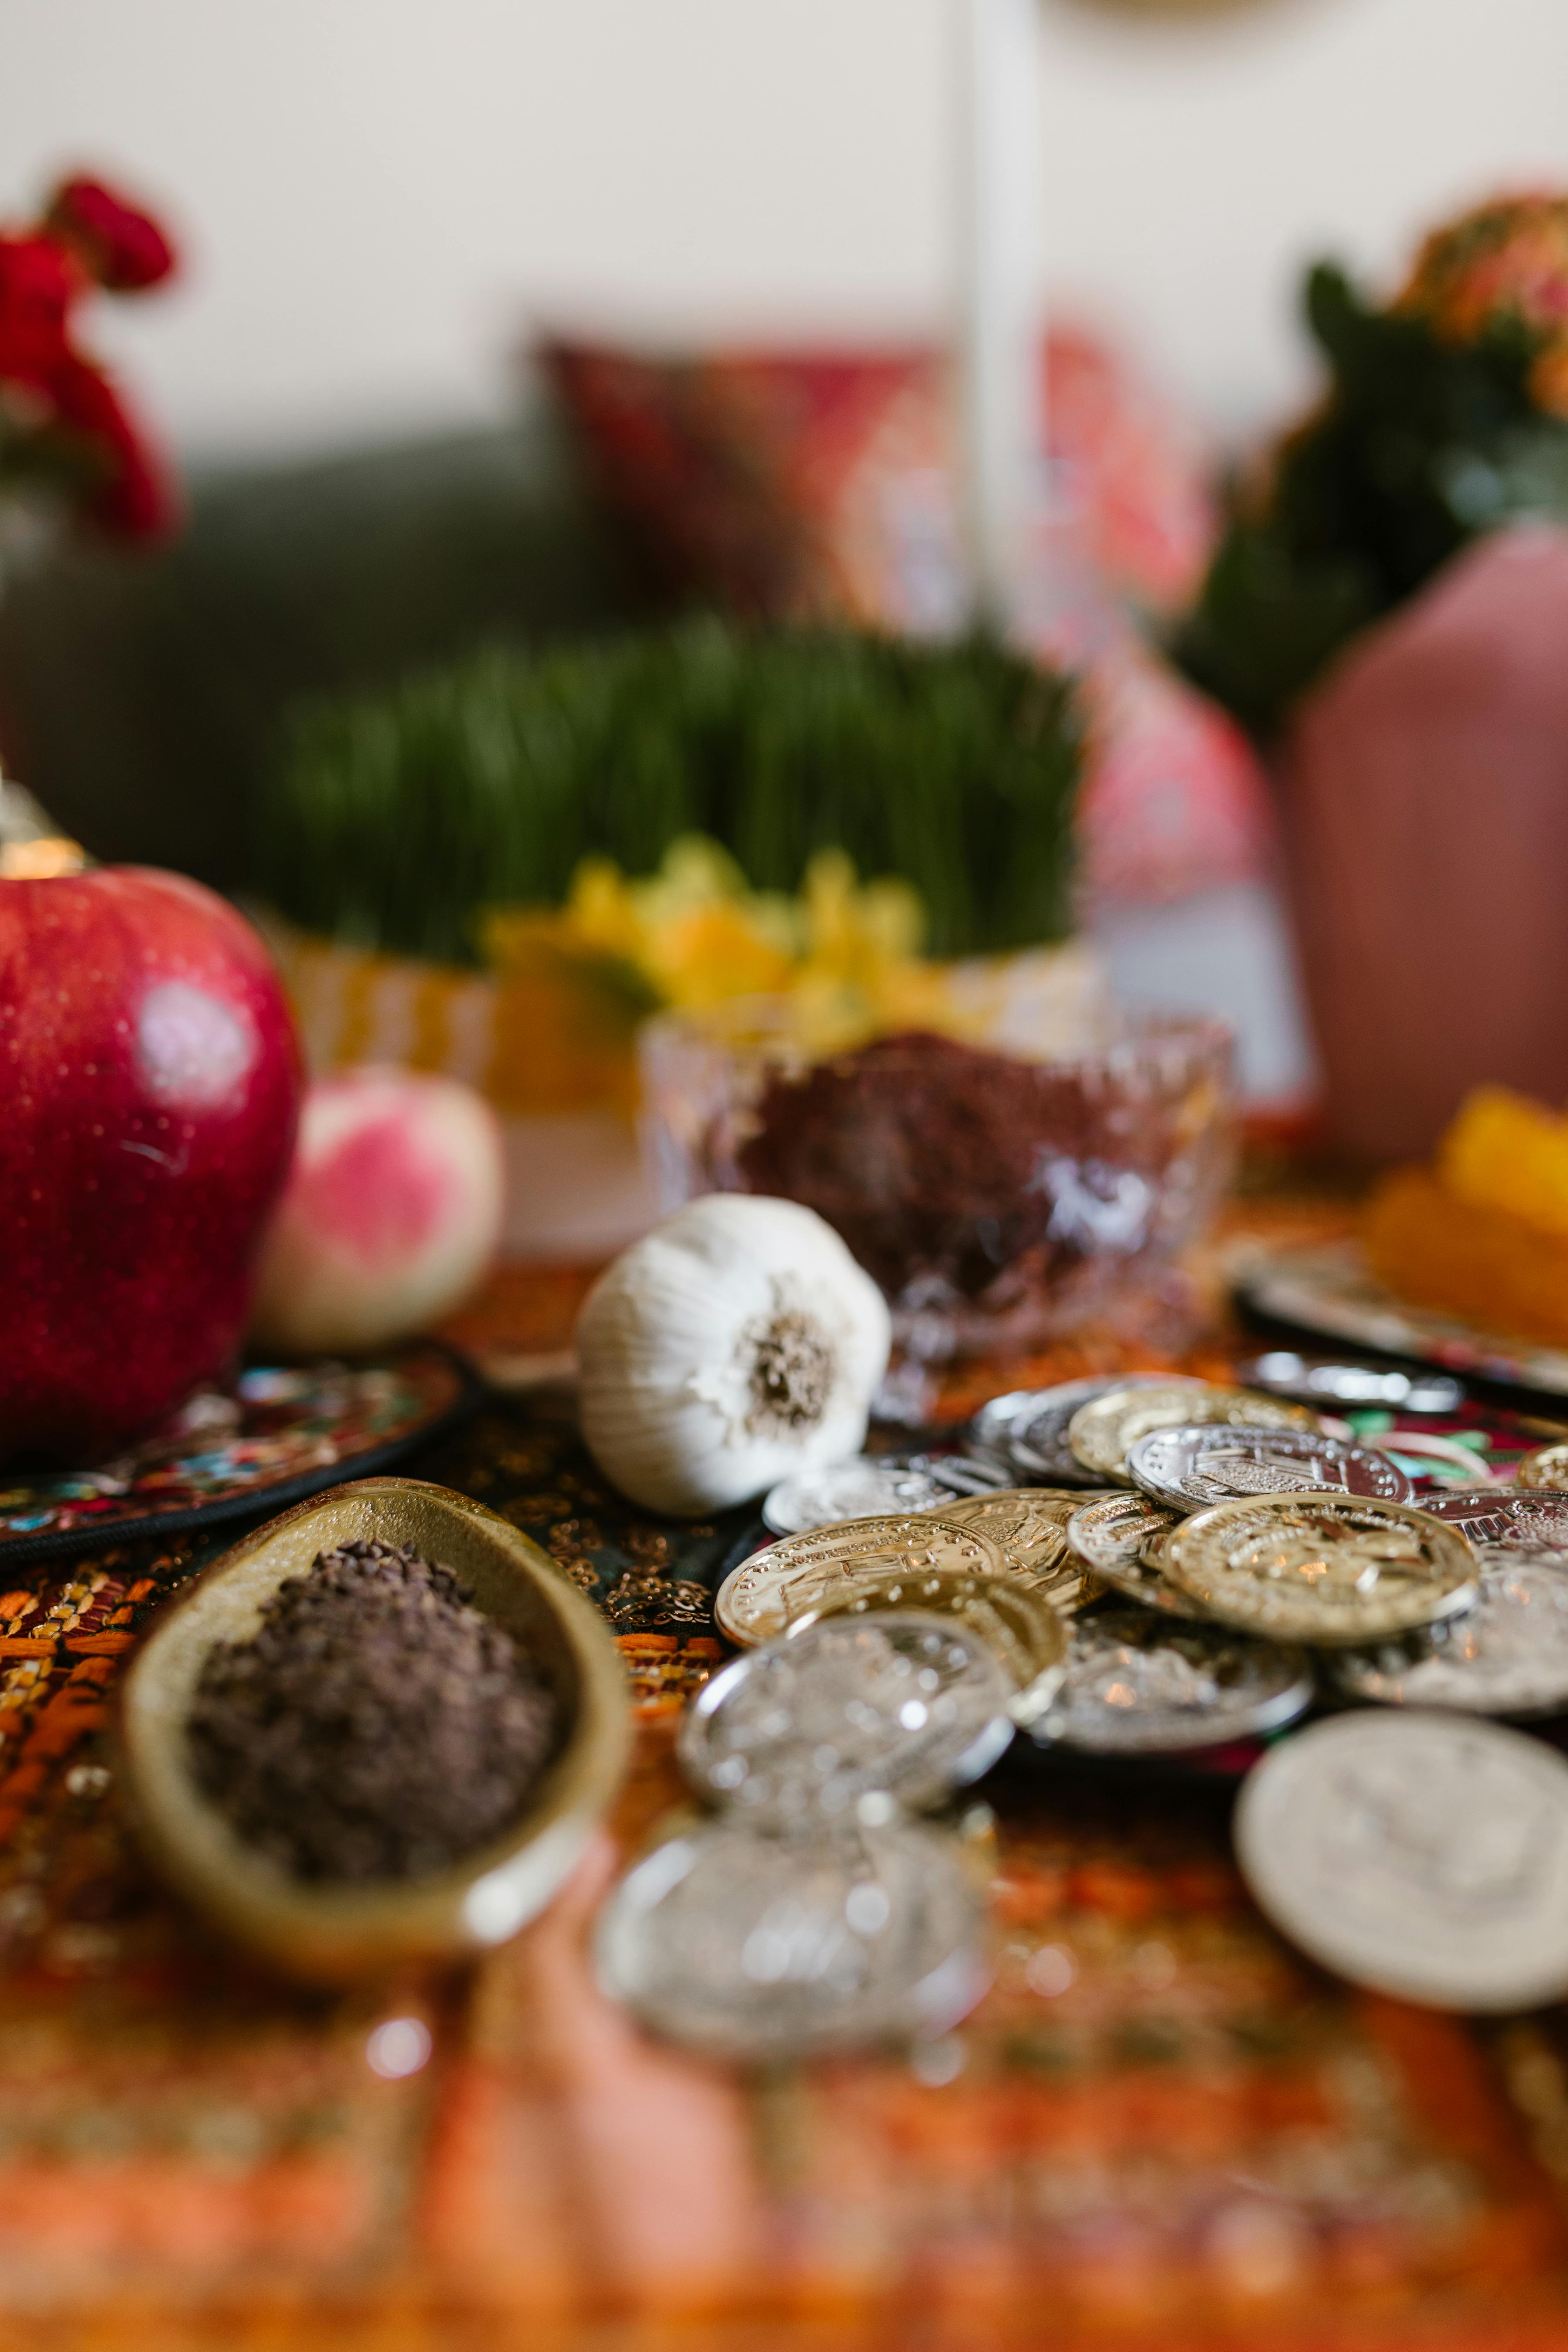 traditional food and coins on table